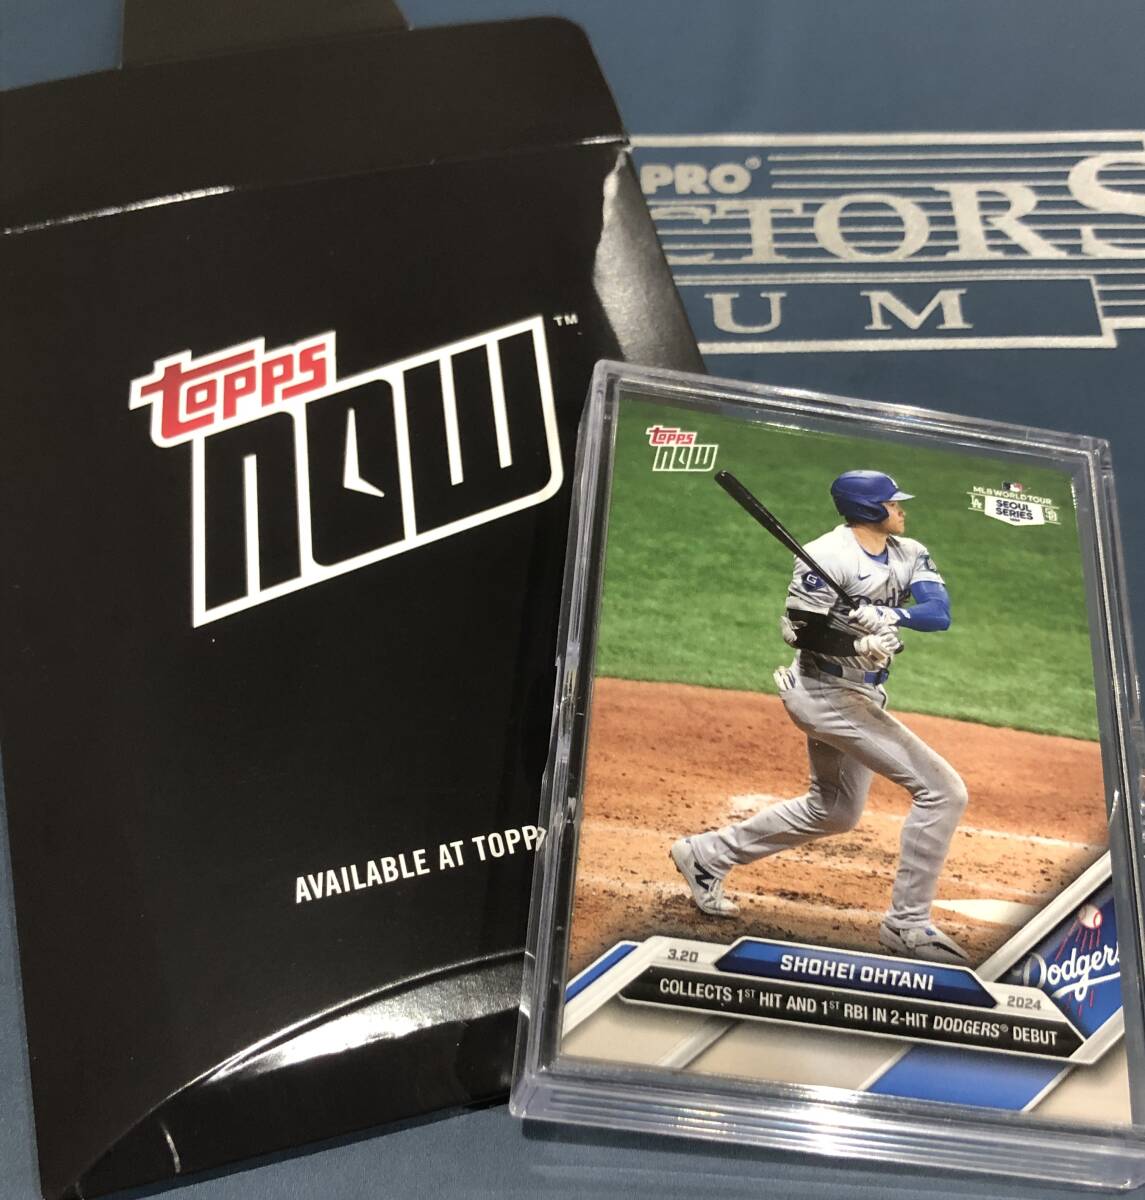 2024 MLB TOPPS NOW 大谷翔平 COLLECTS 1st HIT AND 1st RBI IN 2HIT DODGERS DEBUT ドジャースデビュー 開幕戦 カード　 20枚セット　_画像1